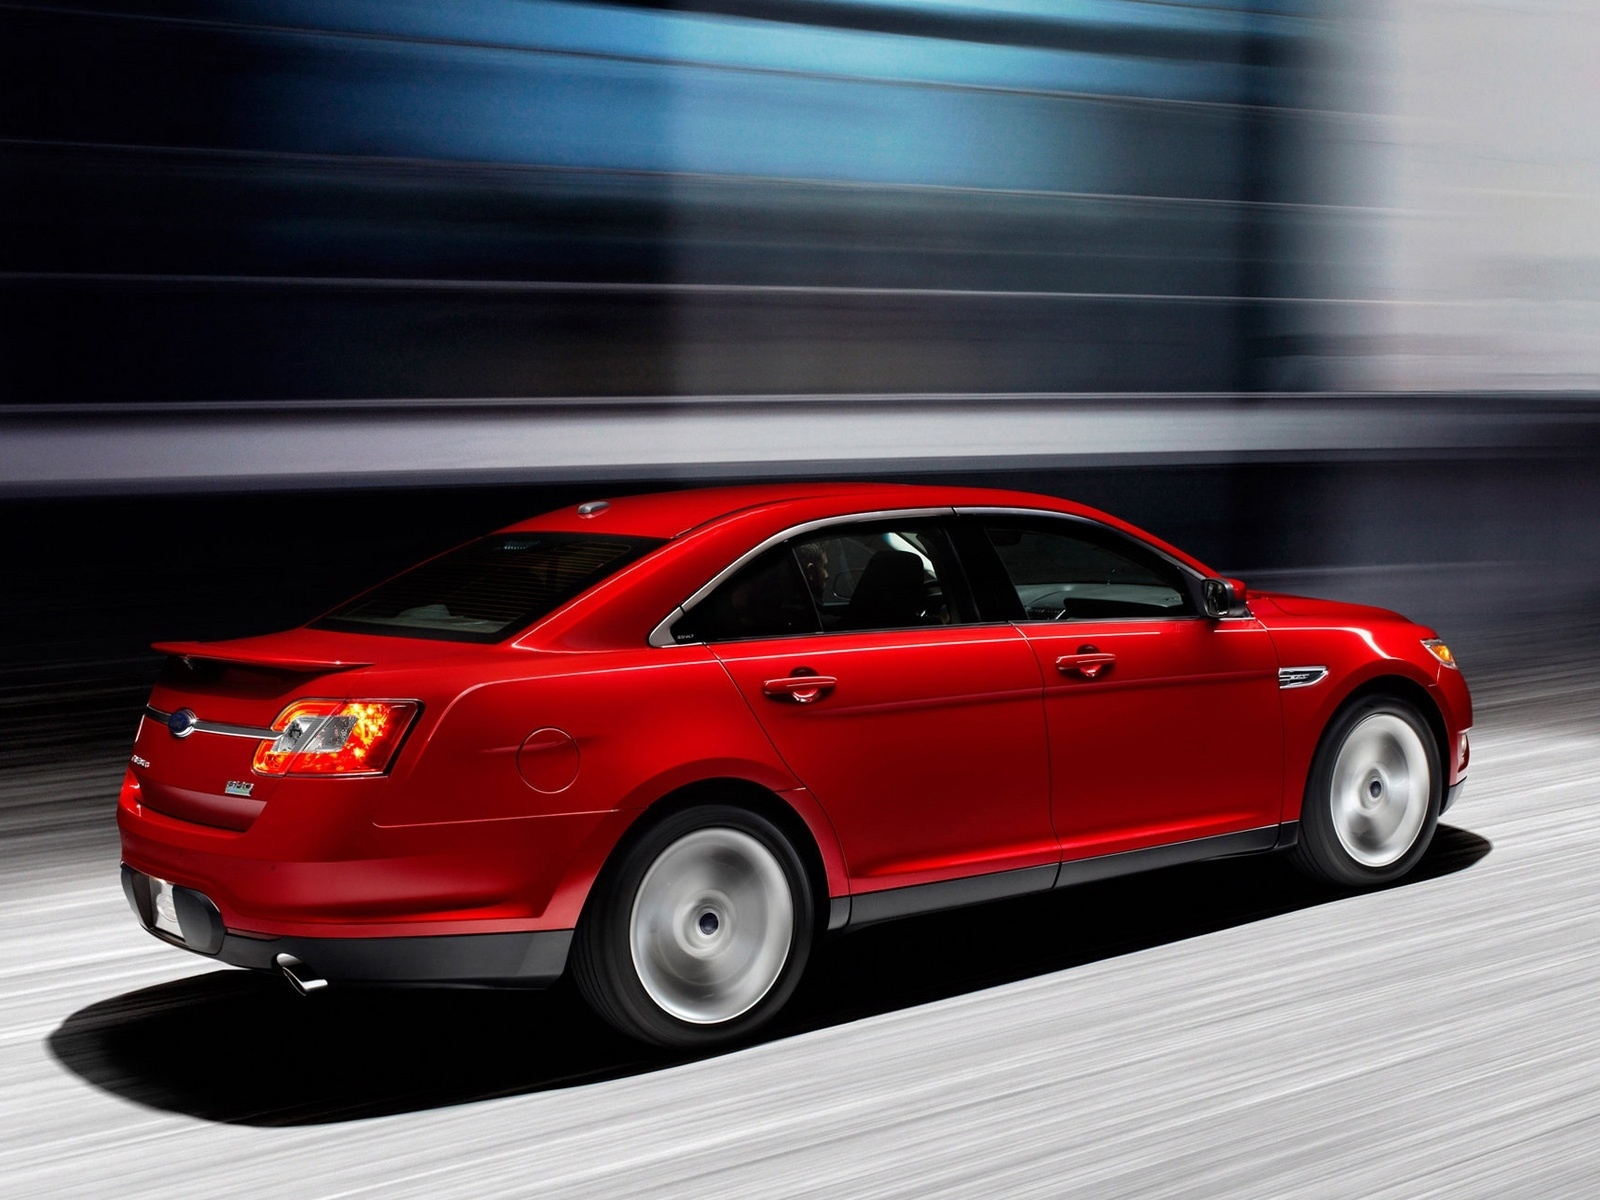 Ford Taurus SHO 2010 for 1600 x 1200 resolution